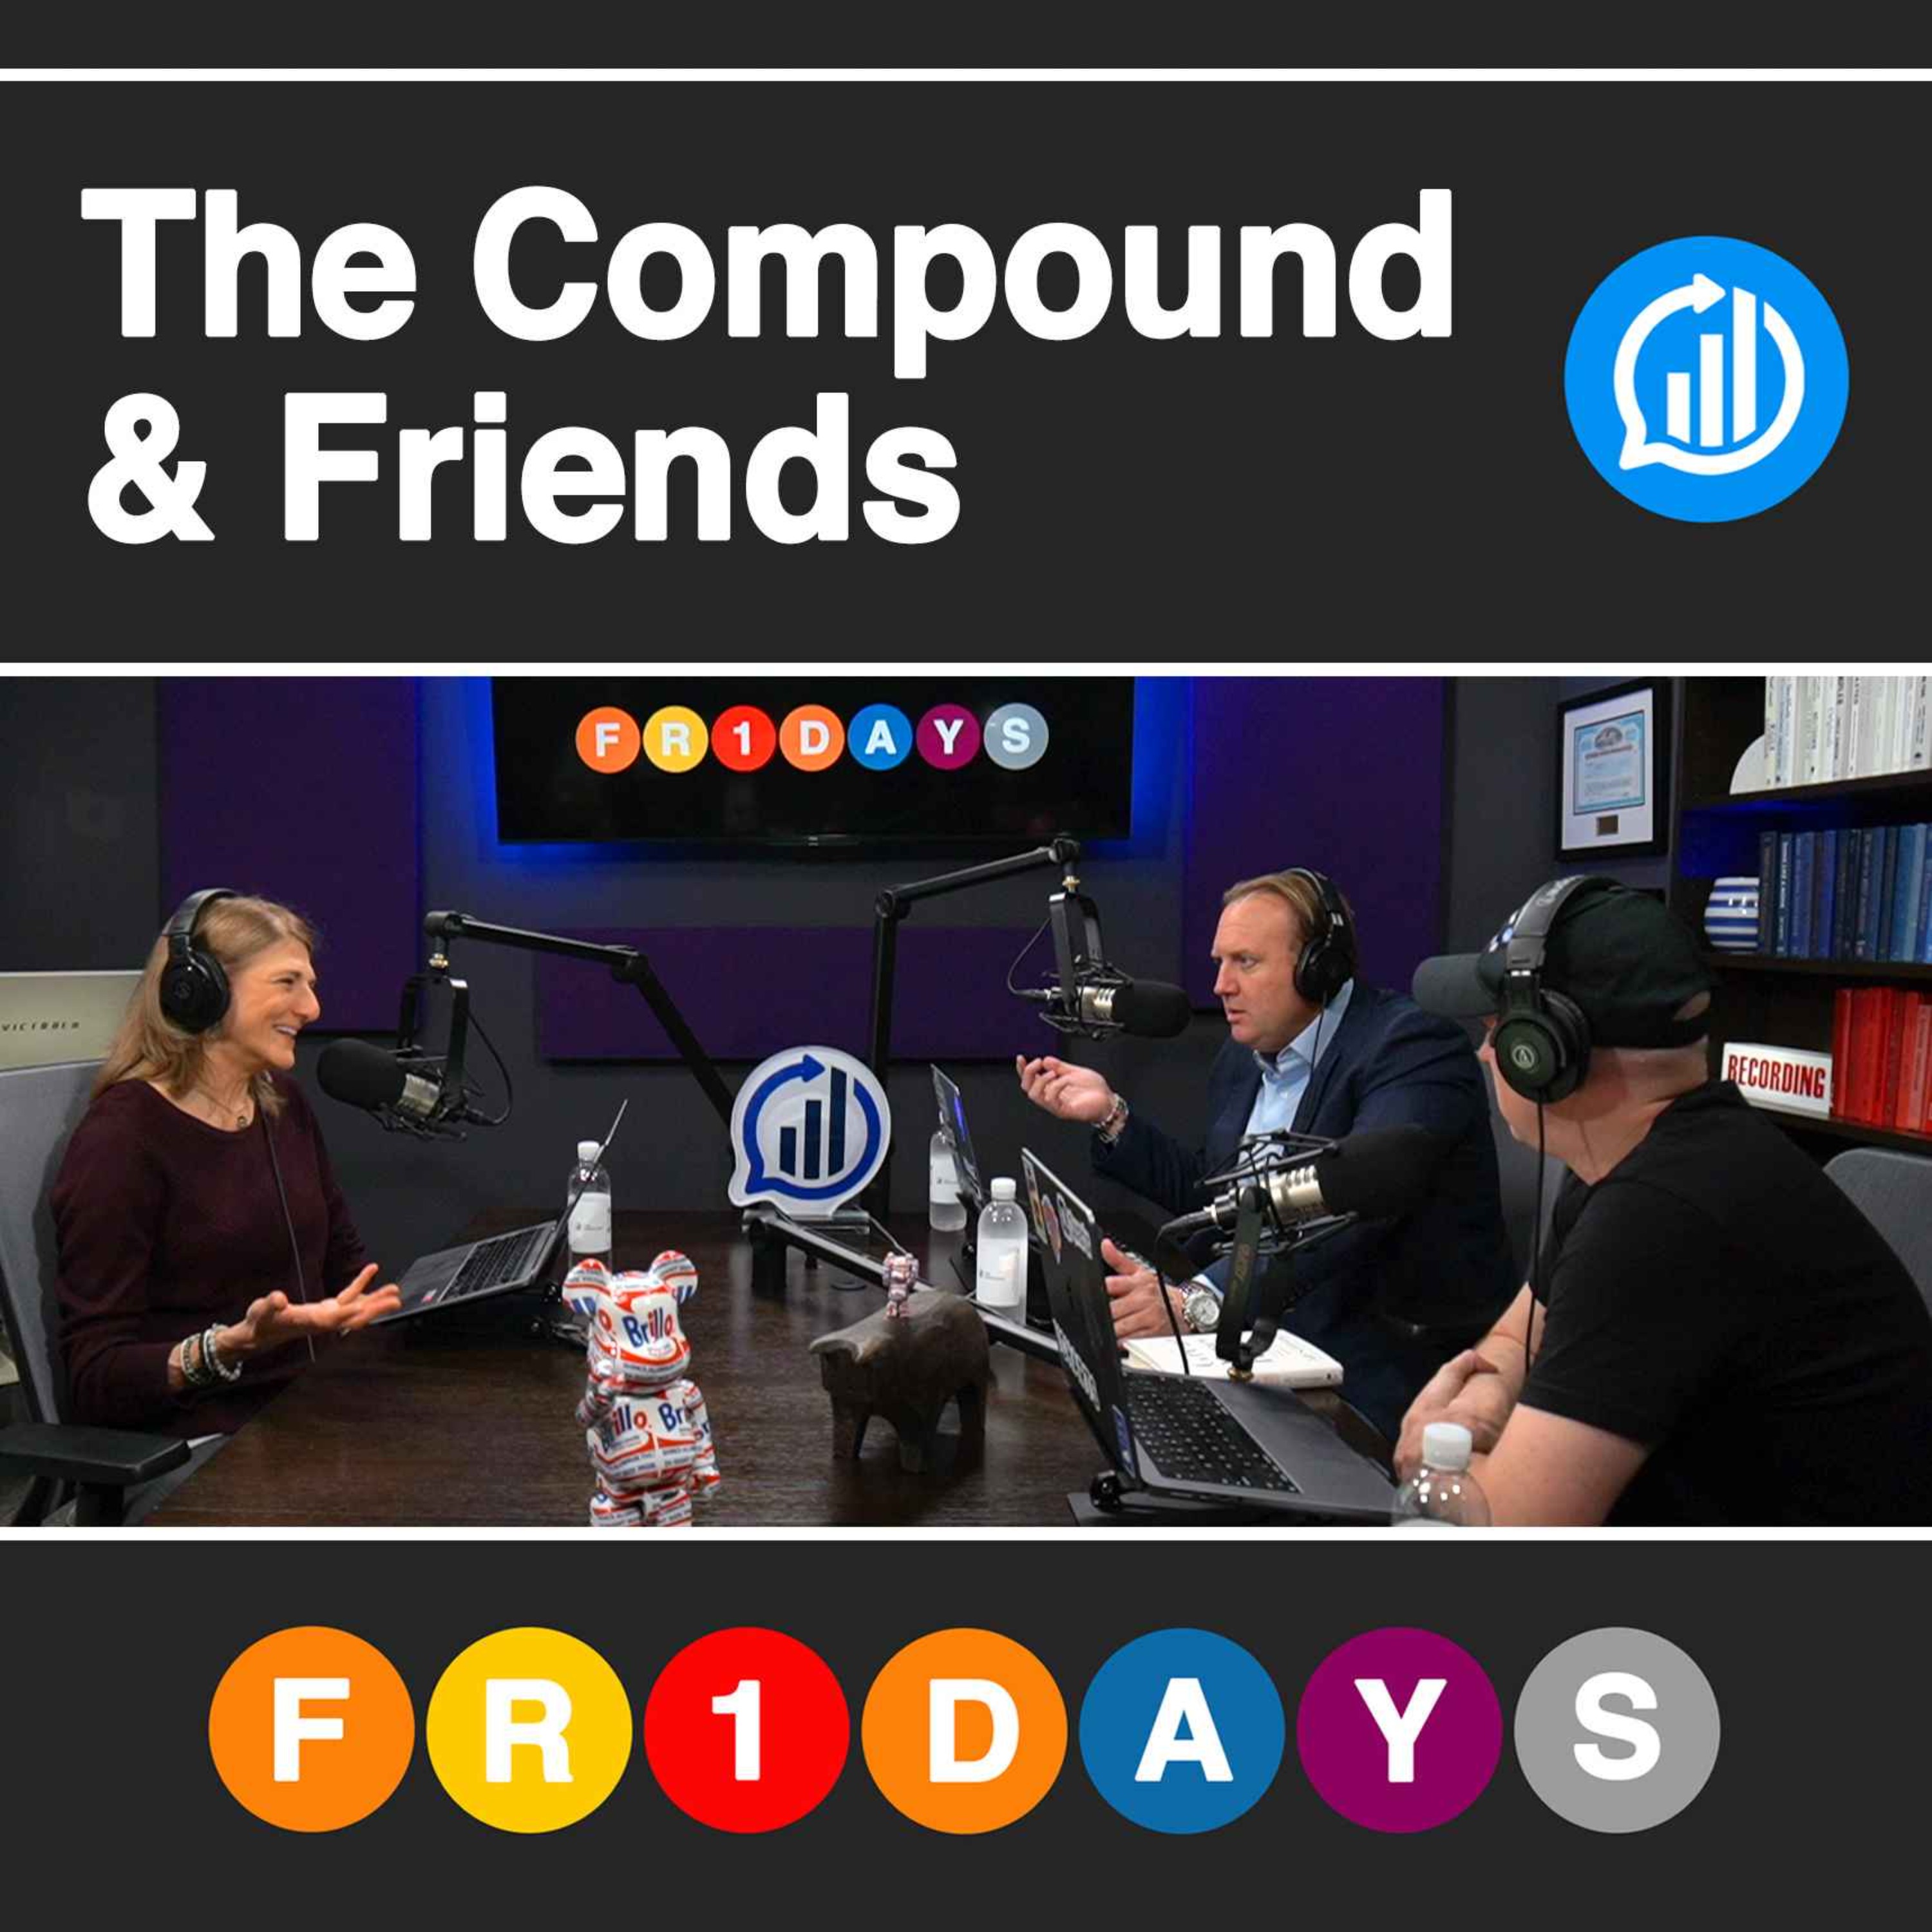 The Compound and Friends podcast show image